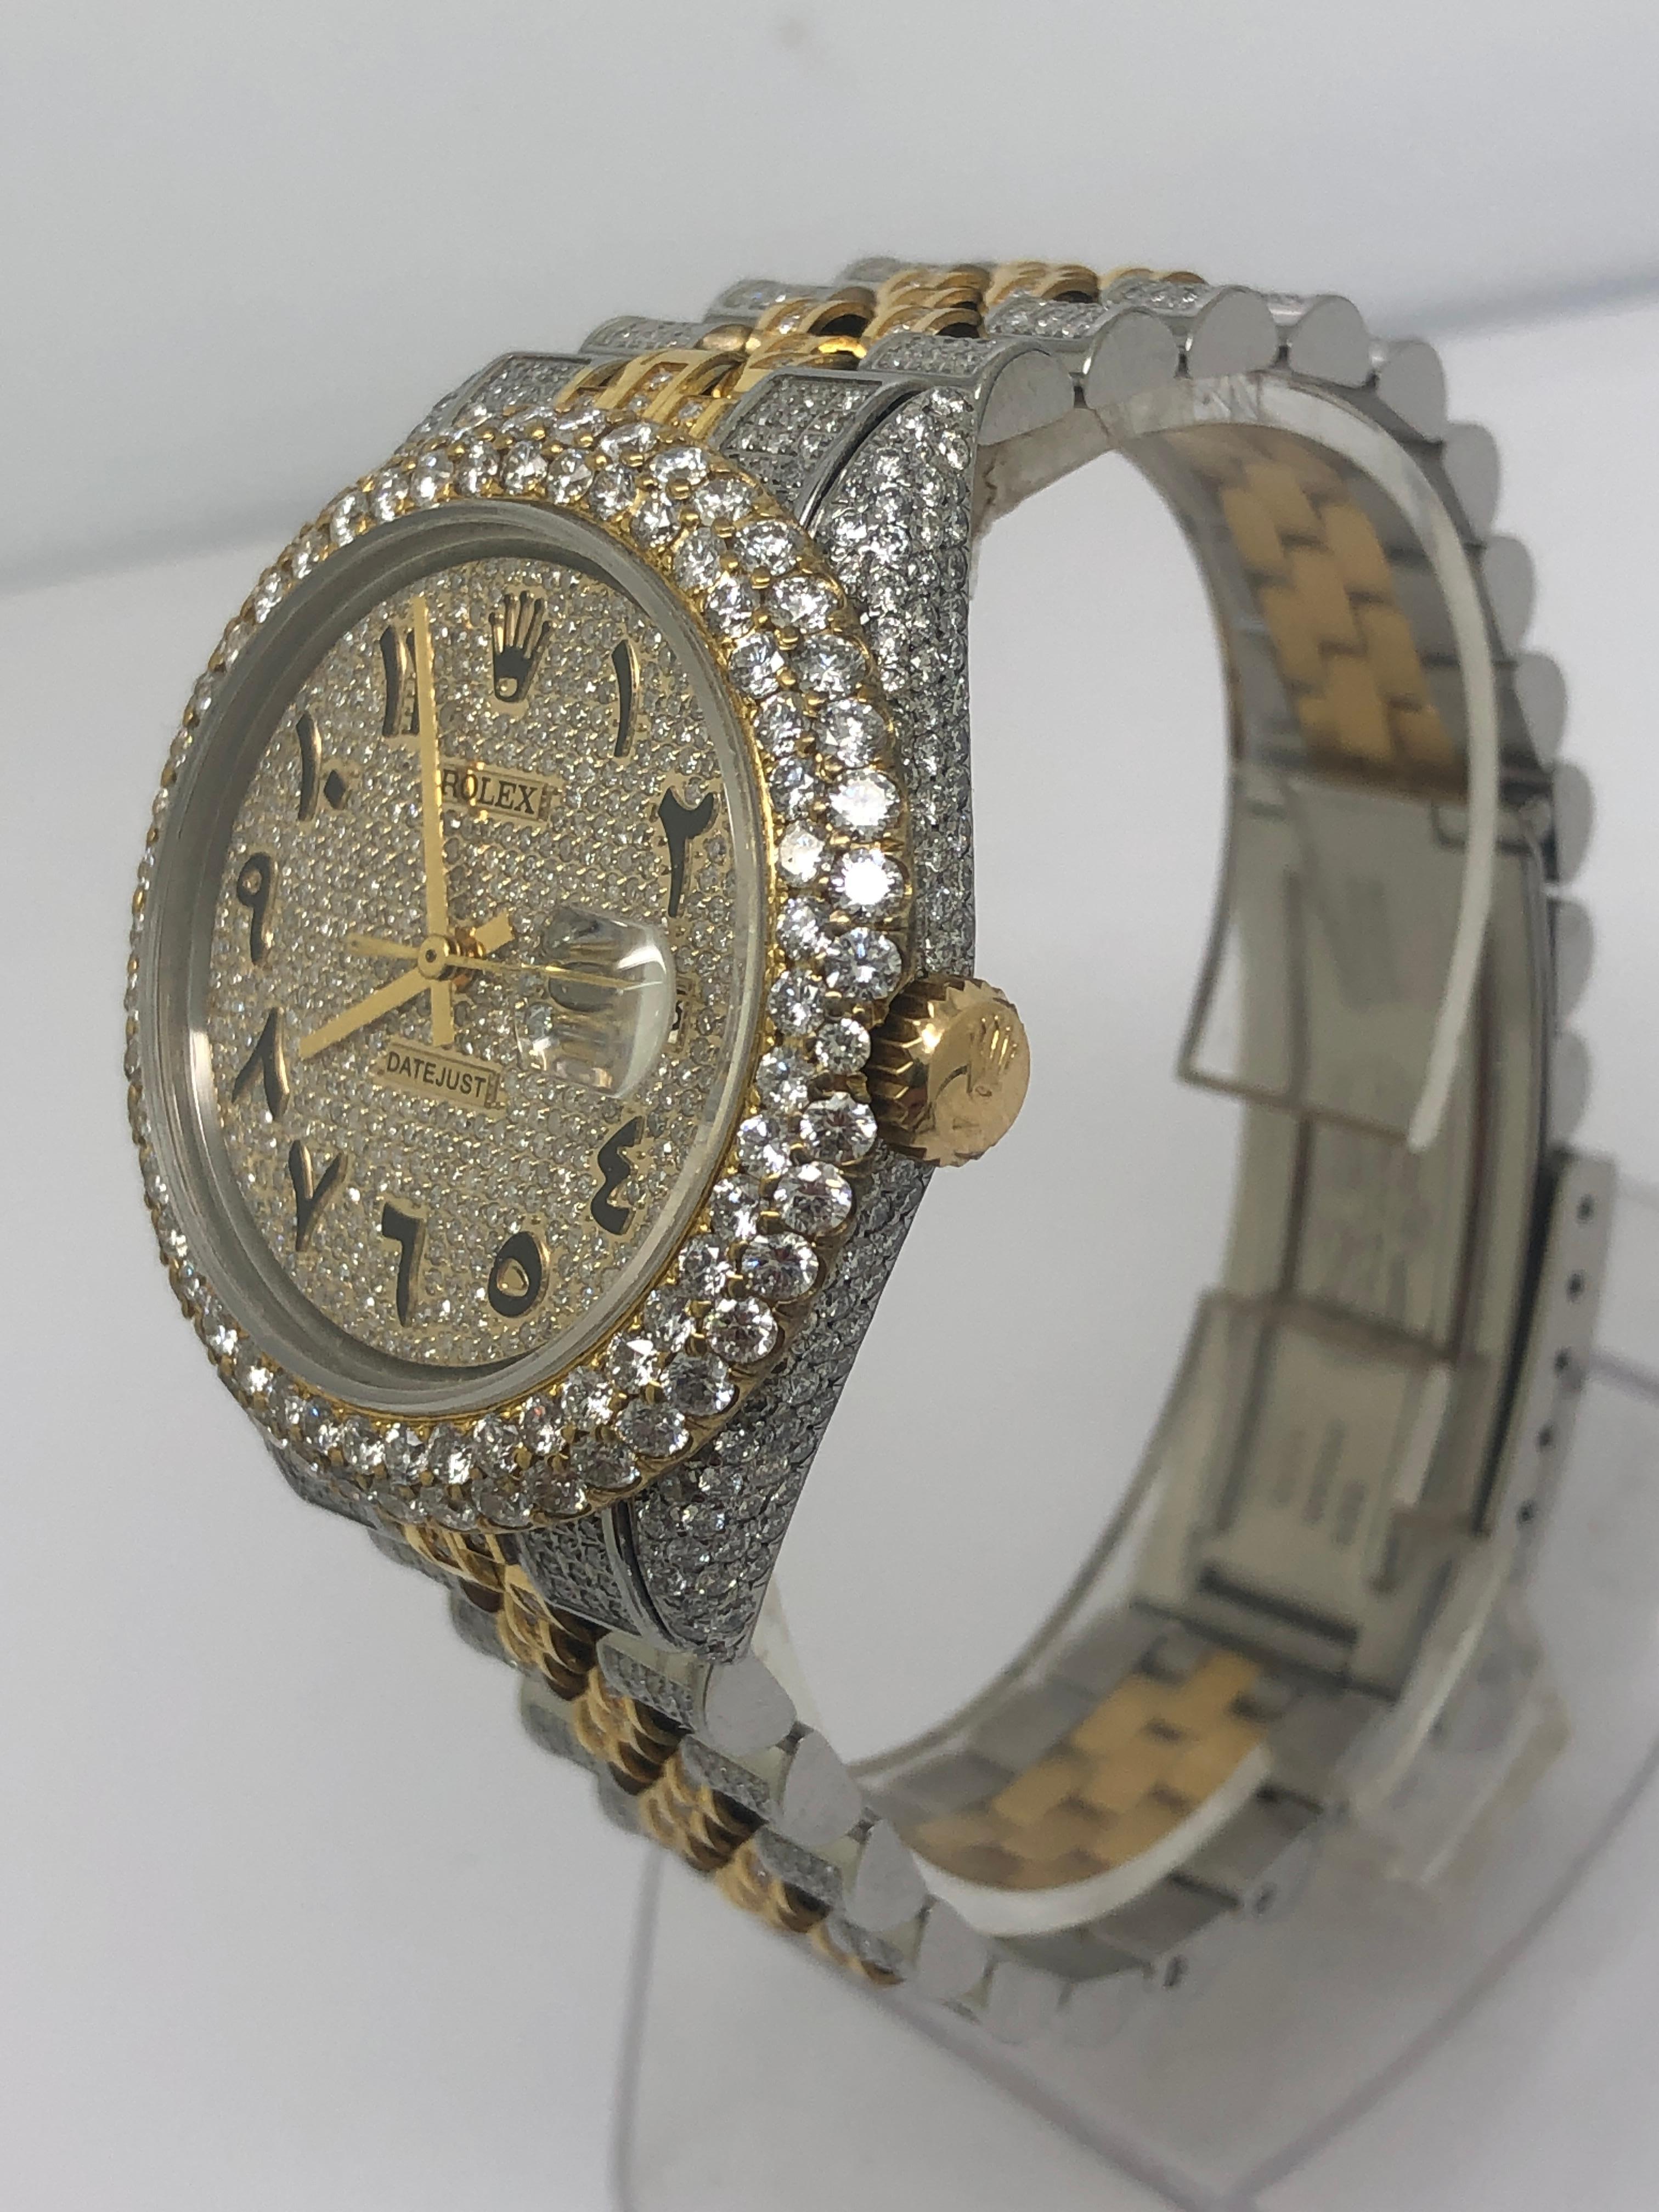 100% Authentic Rolex Datejust Iced out completely with collection quality vs white natural diamonds

20 carats in collection quality diamonds

yellow gold and stainless steel bracelet fully linked size 9 inches links can be removed

fully iced out